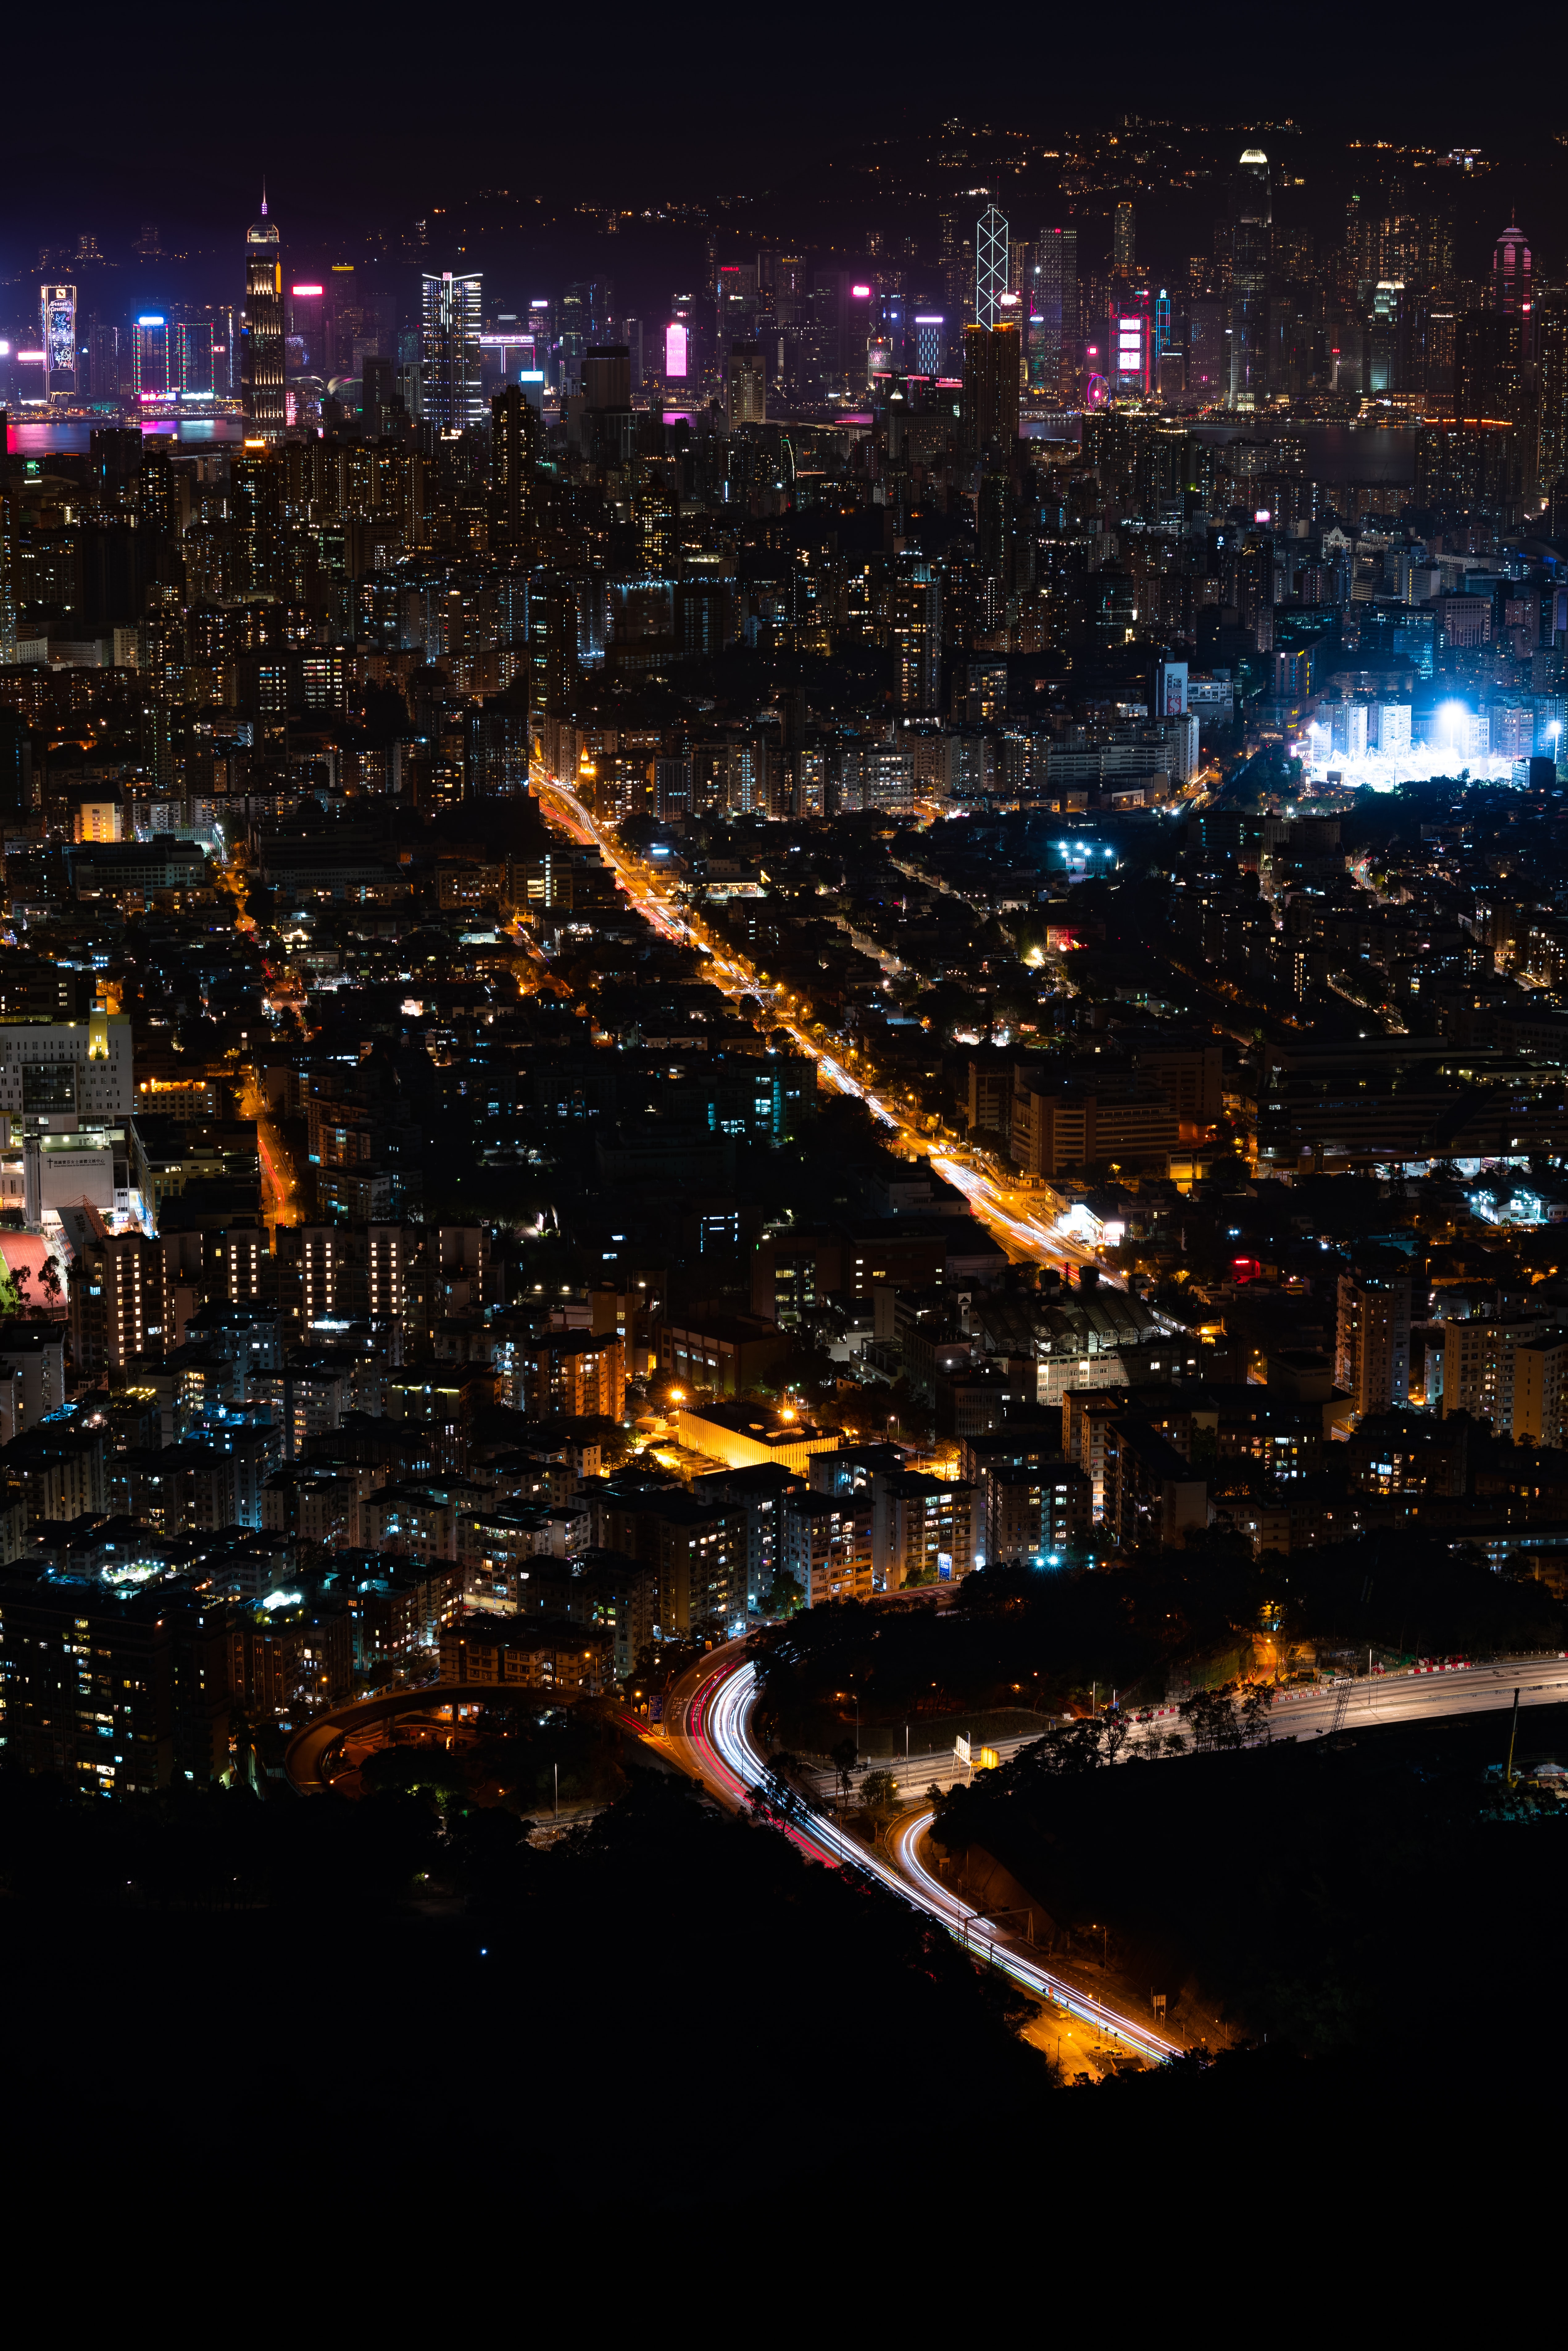 cityscape, cities, city, lights, view from above, night city, urban landscape